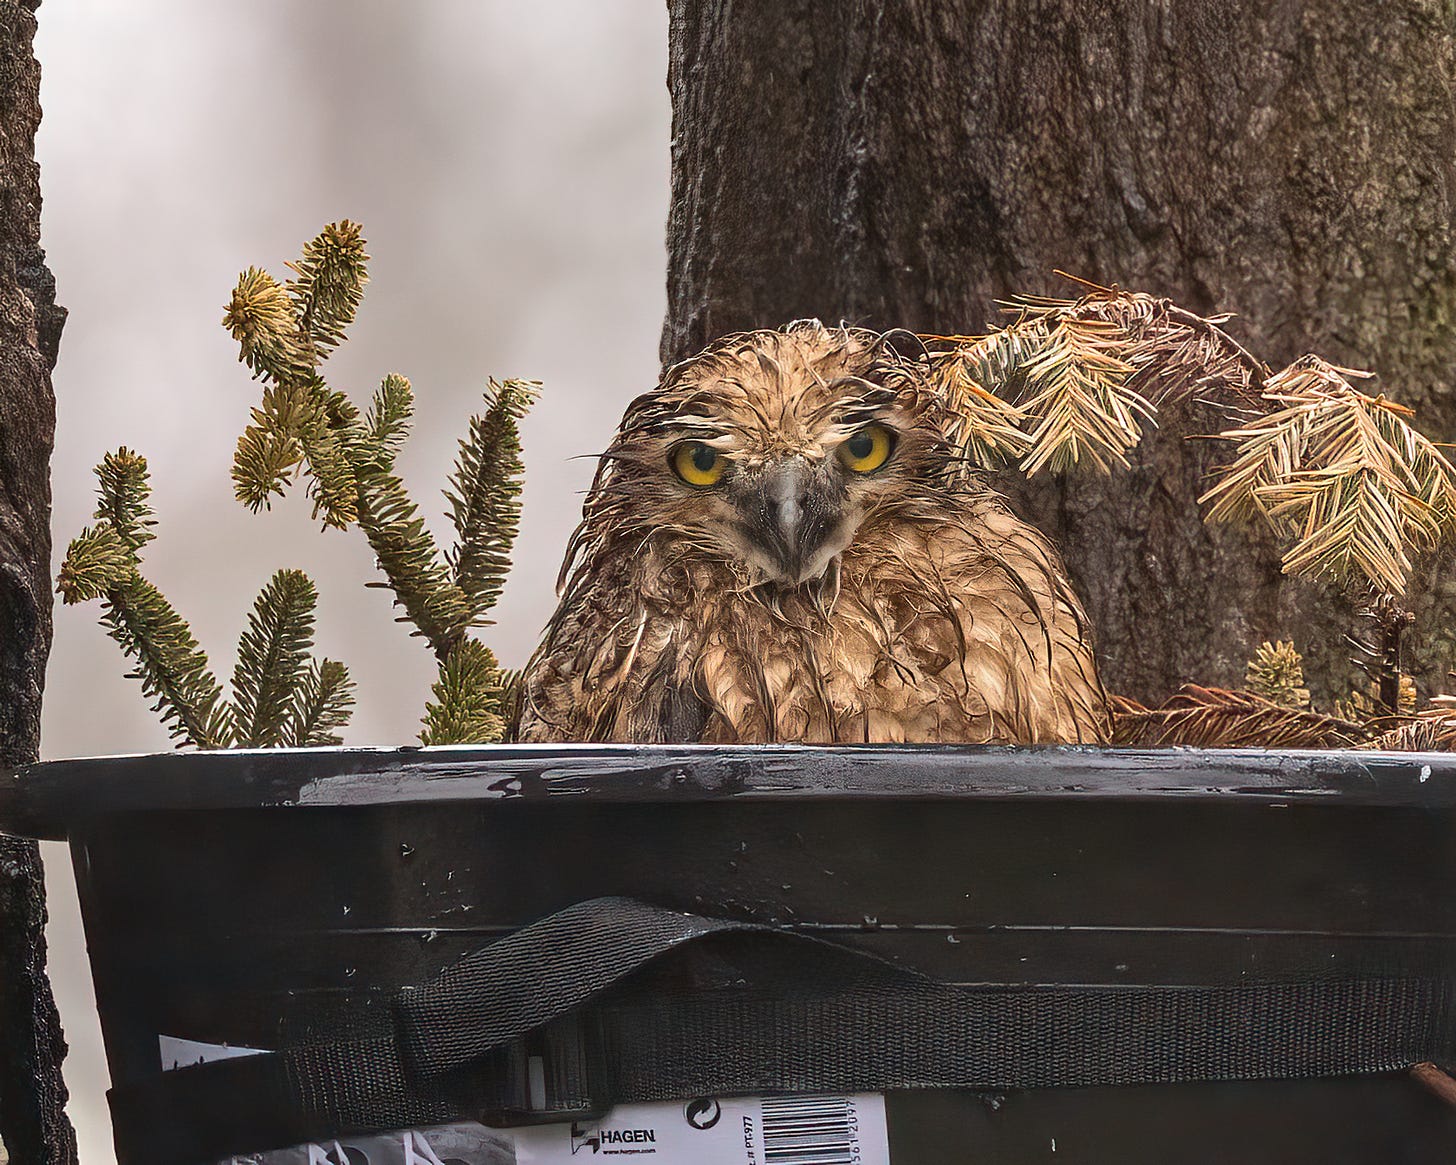 In this image, the baby owls feathers are soaked and matted down. It's bright yellow eyes stare straight ahead at the camera. This owl does not look happy.